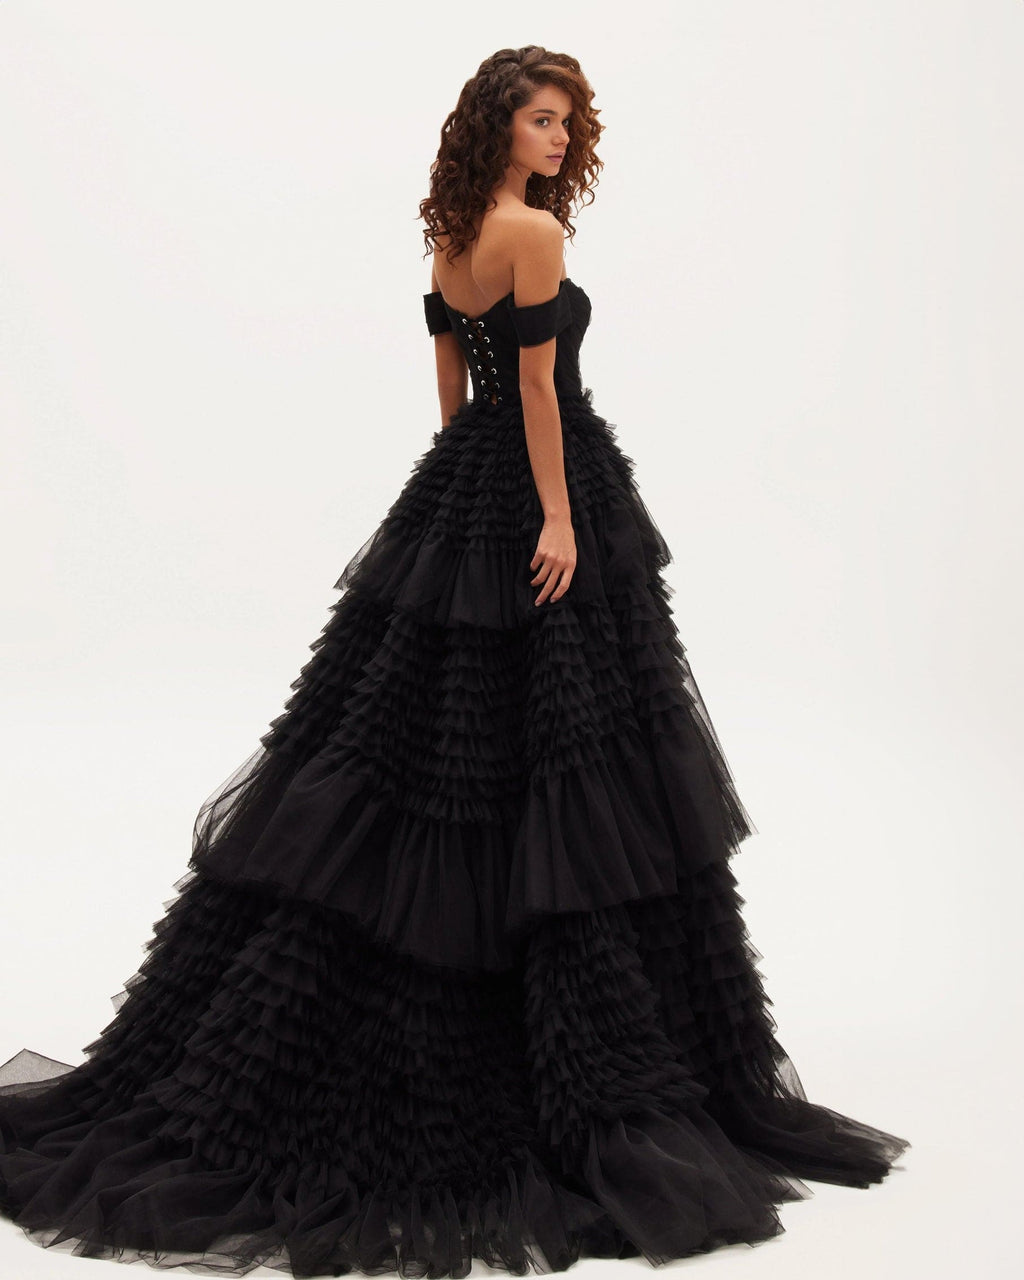 Black Off-The-Shoulder Frill-Layered Gown